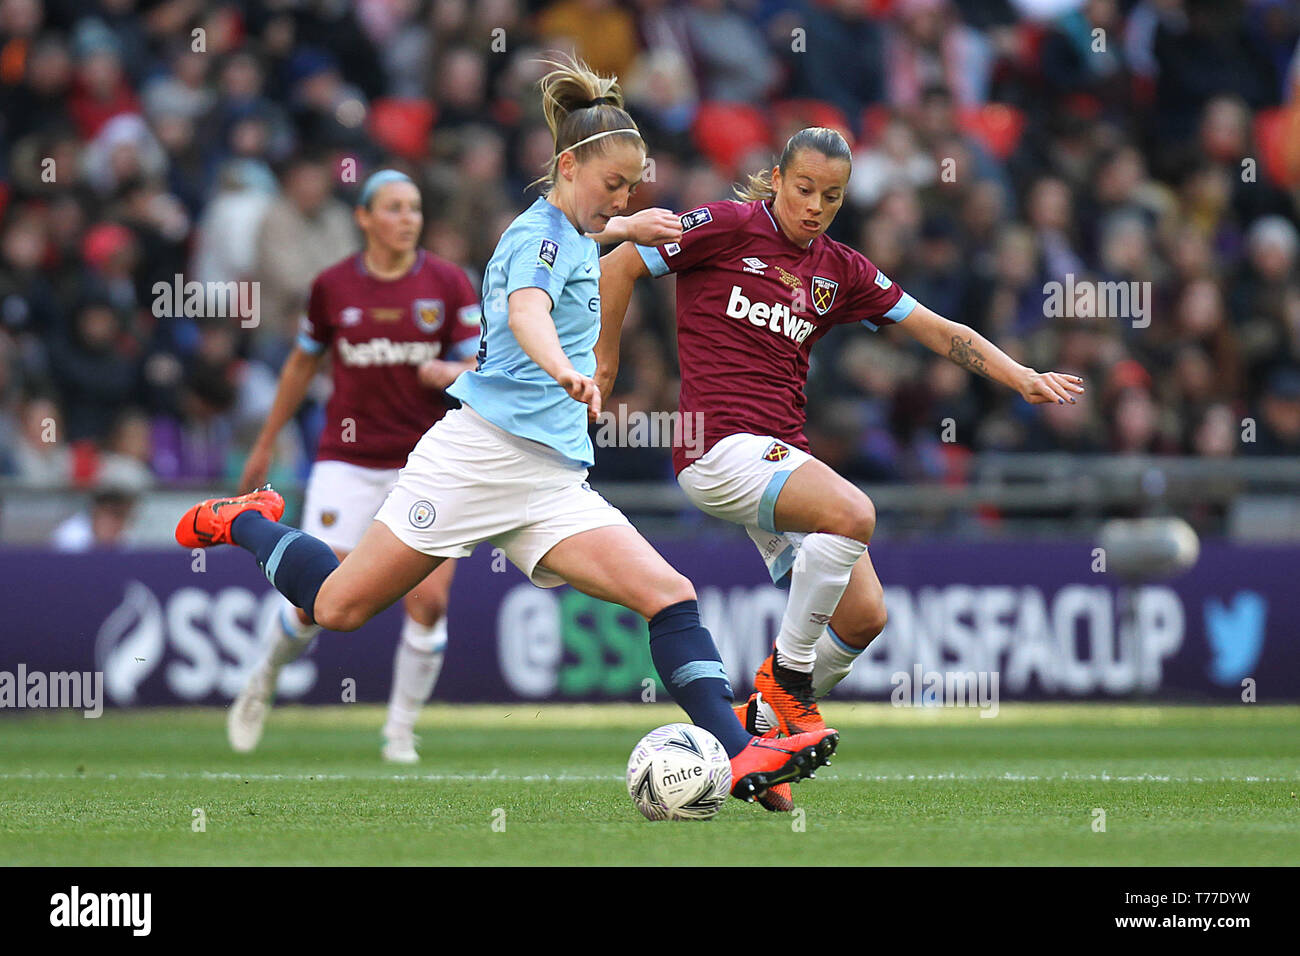 London, UK. 04th May, 2019. Keira Walsh of Manchester City is challenged by Ria Percival of West Ham United during the FA Women's Cup Final match between Manchester City Women and West Ham United Ladies at Wembley Stadium on May 4th 2019 in London, England. Credit: PHC Images/Alamy Live News Stock Photo